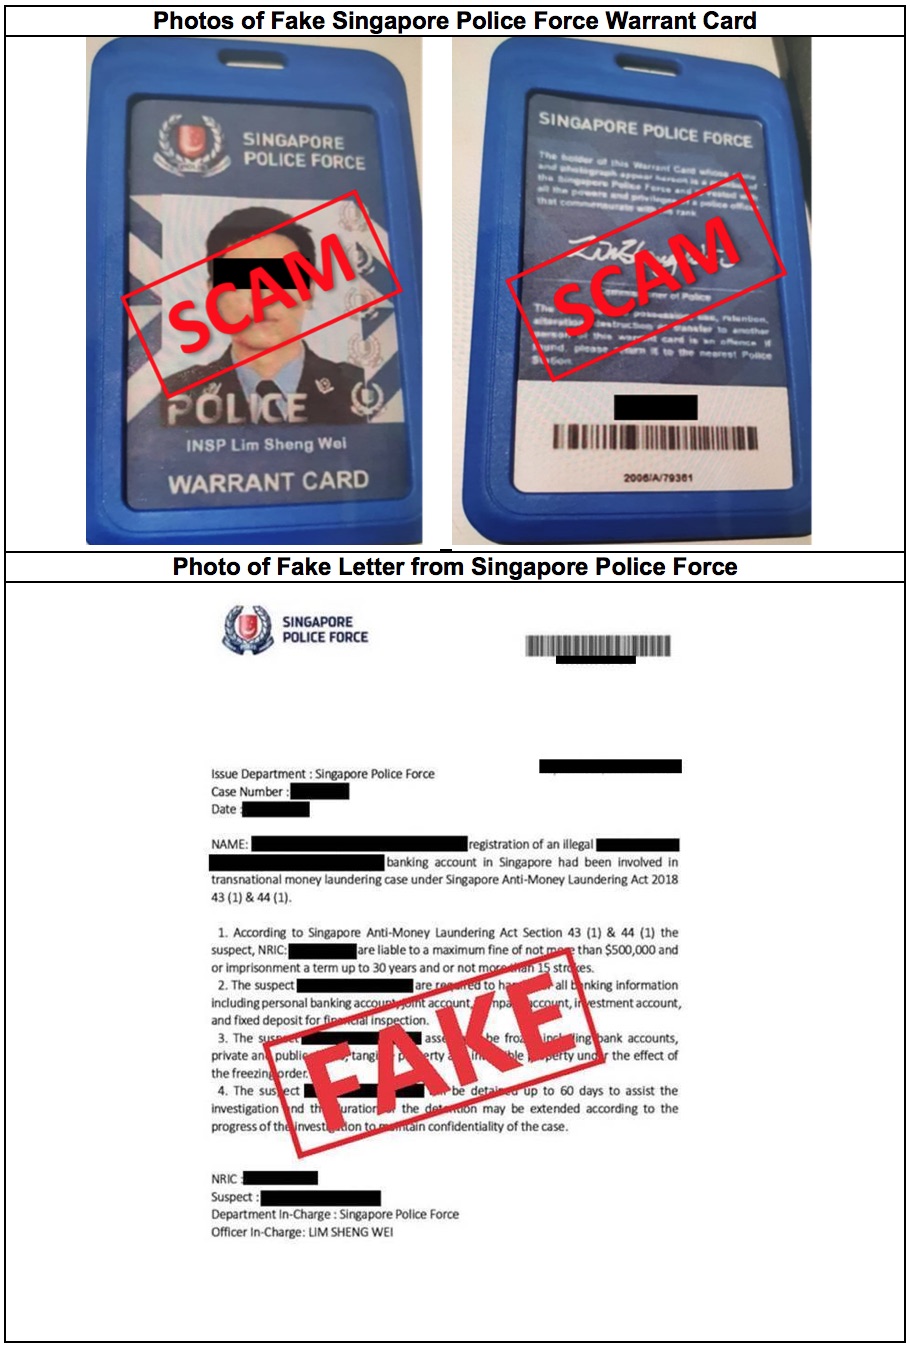 Police Advisory On Government Officials Impersonation Scams Police Advisory – Re-Emergence Of Government Official Impersonation Scam Involving Fake Police Warrant Card